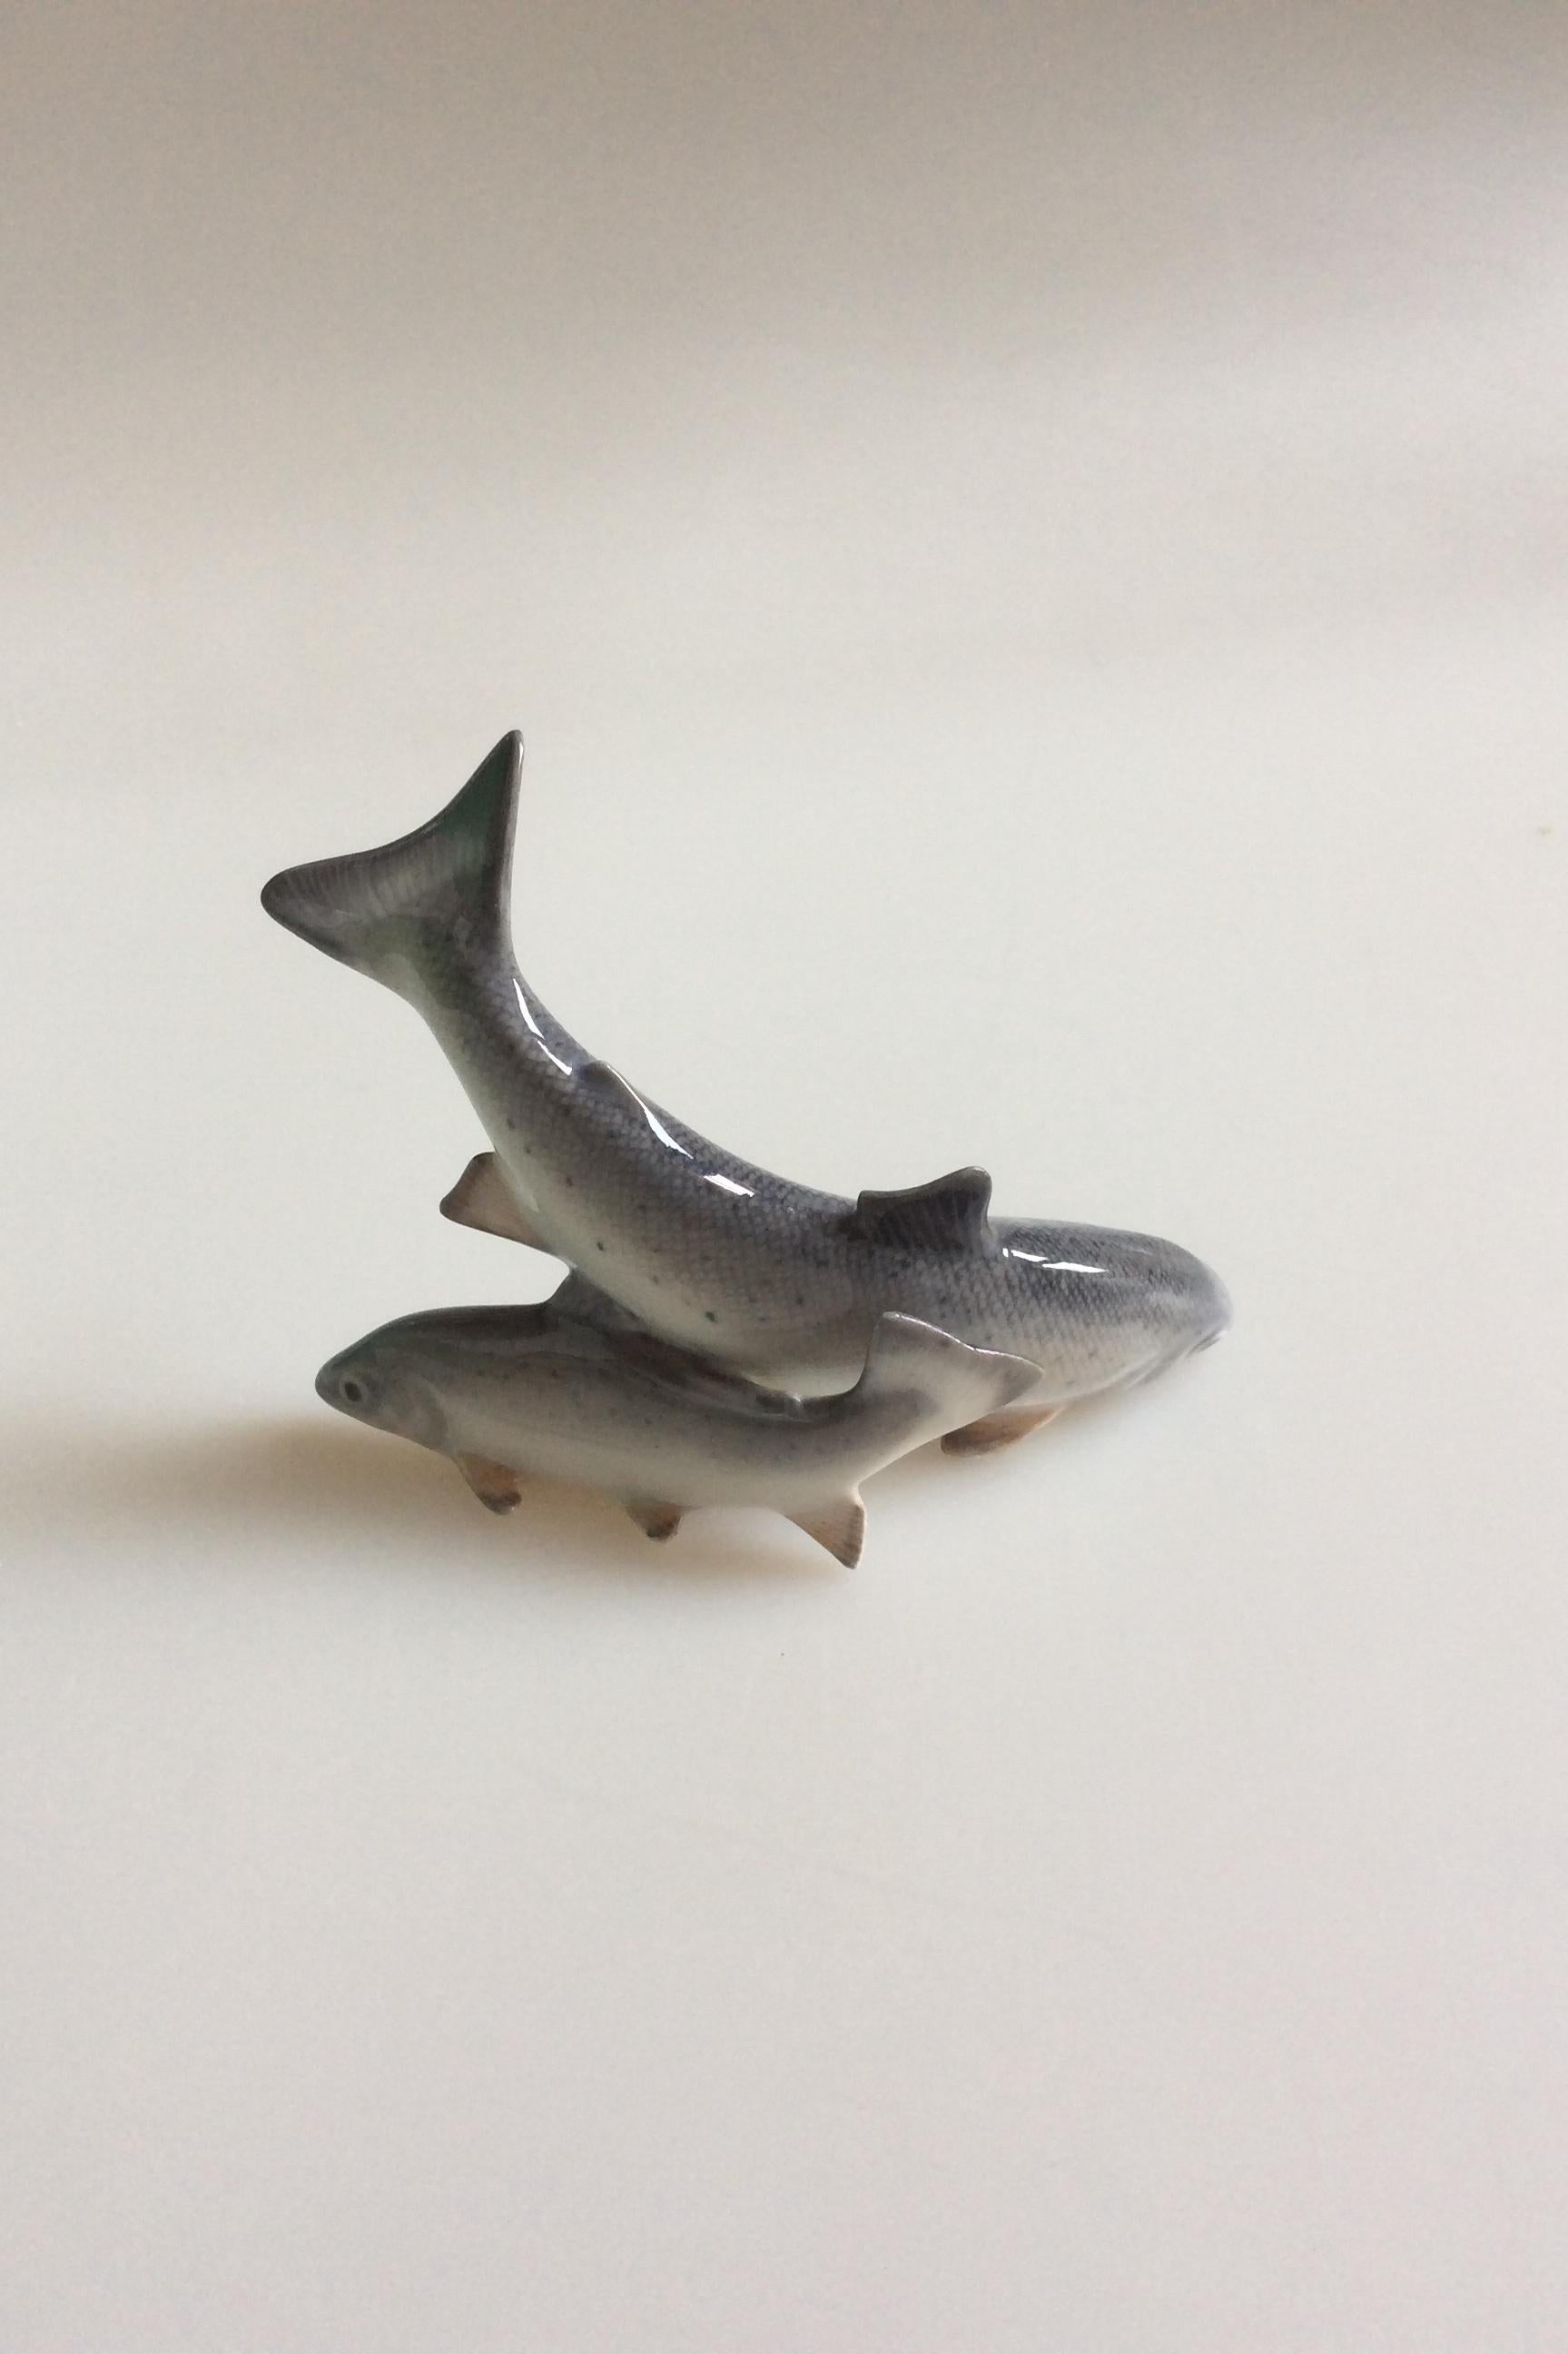 Royal Copenhagen figurine of 2 trouts no 2738.

Measures 13.5 cm long and 10.3 cm high (5 3/10 in. and 4 1/20 in.)

In perfect condition. An extremely rare figurine.